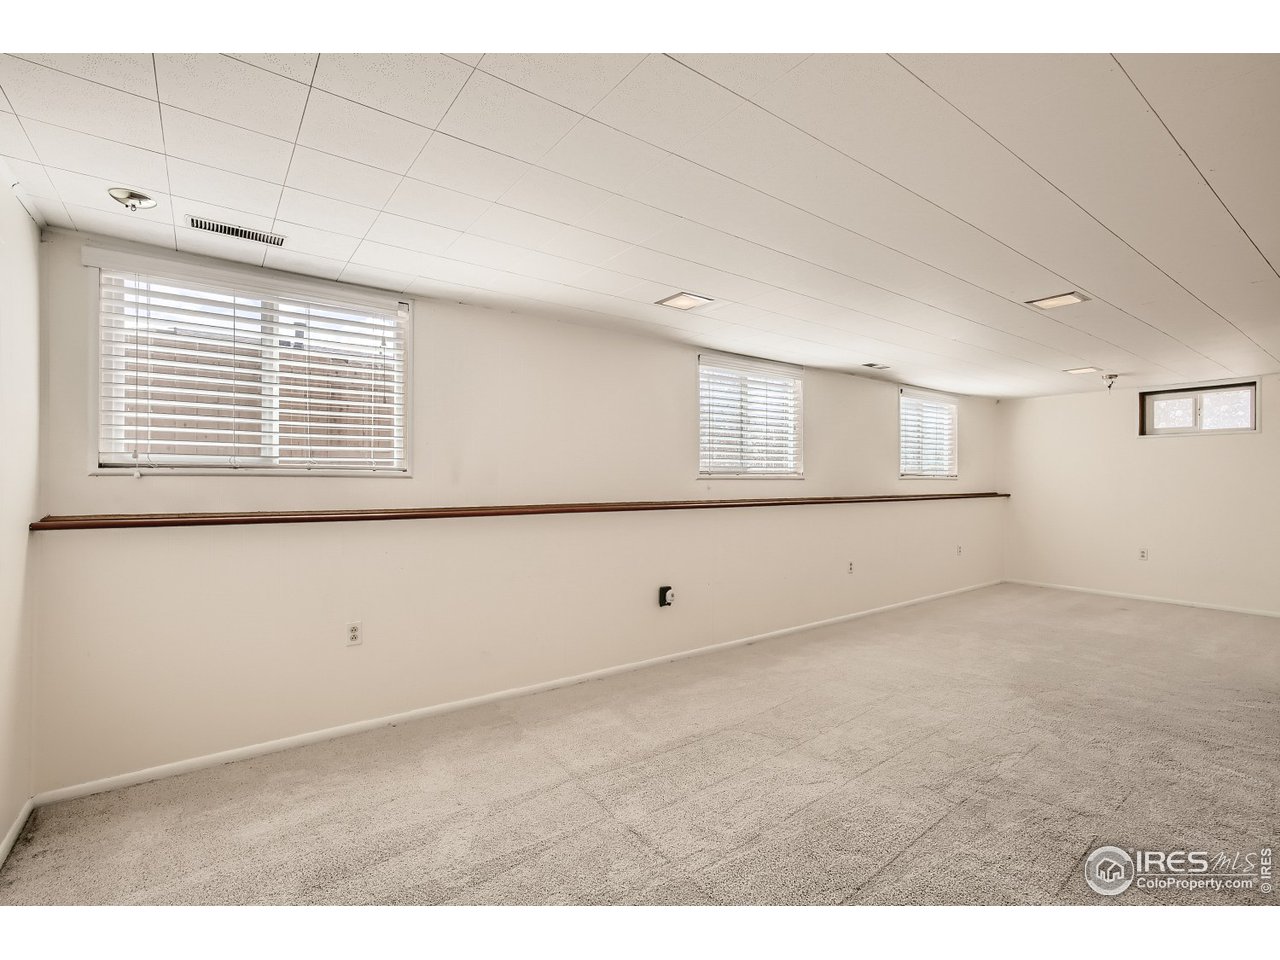 Spacious, well-lit, finished basement. Tons of opportunity to create the room of your dreams!